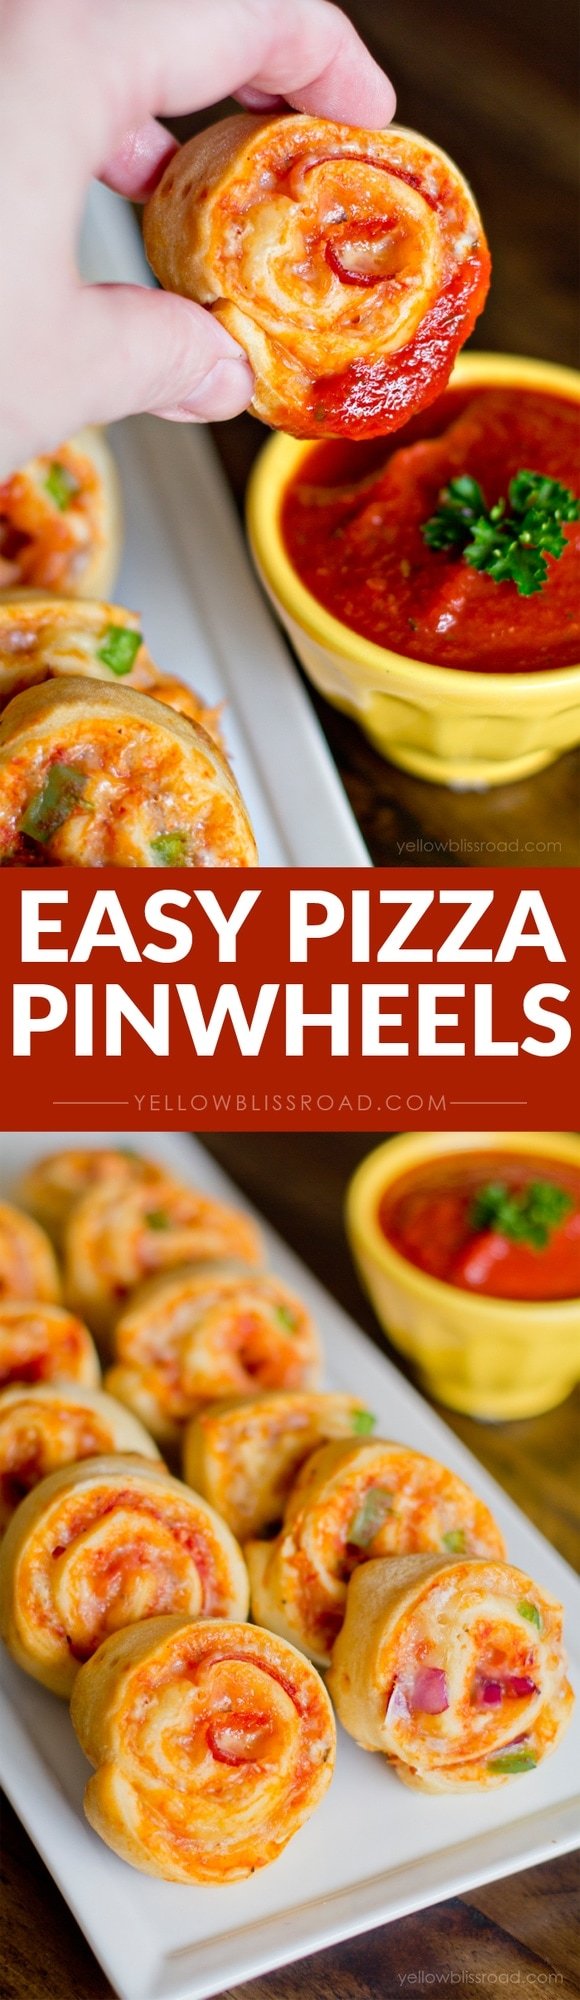 Easy Pizza Pinwheels - A fun snack and the perfect finger food!